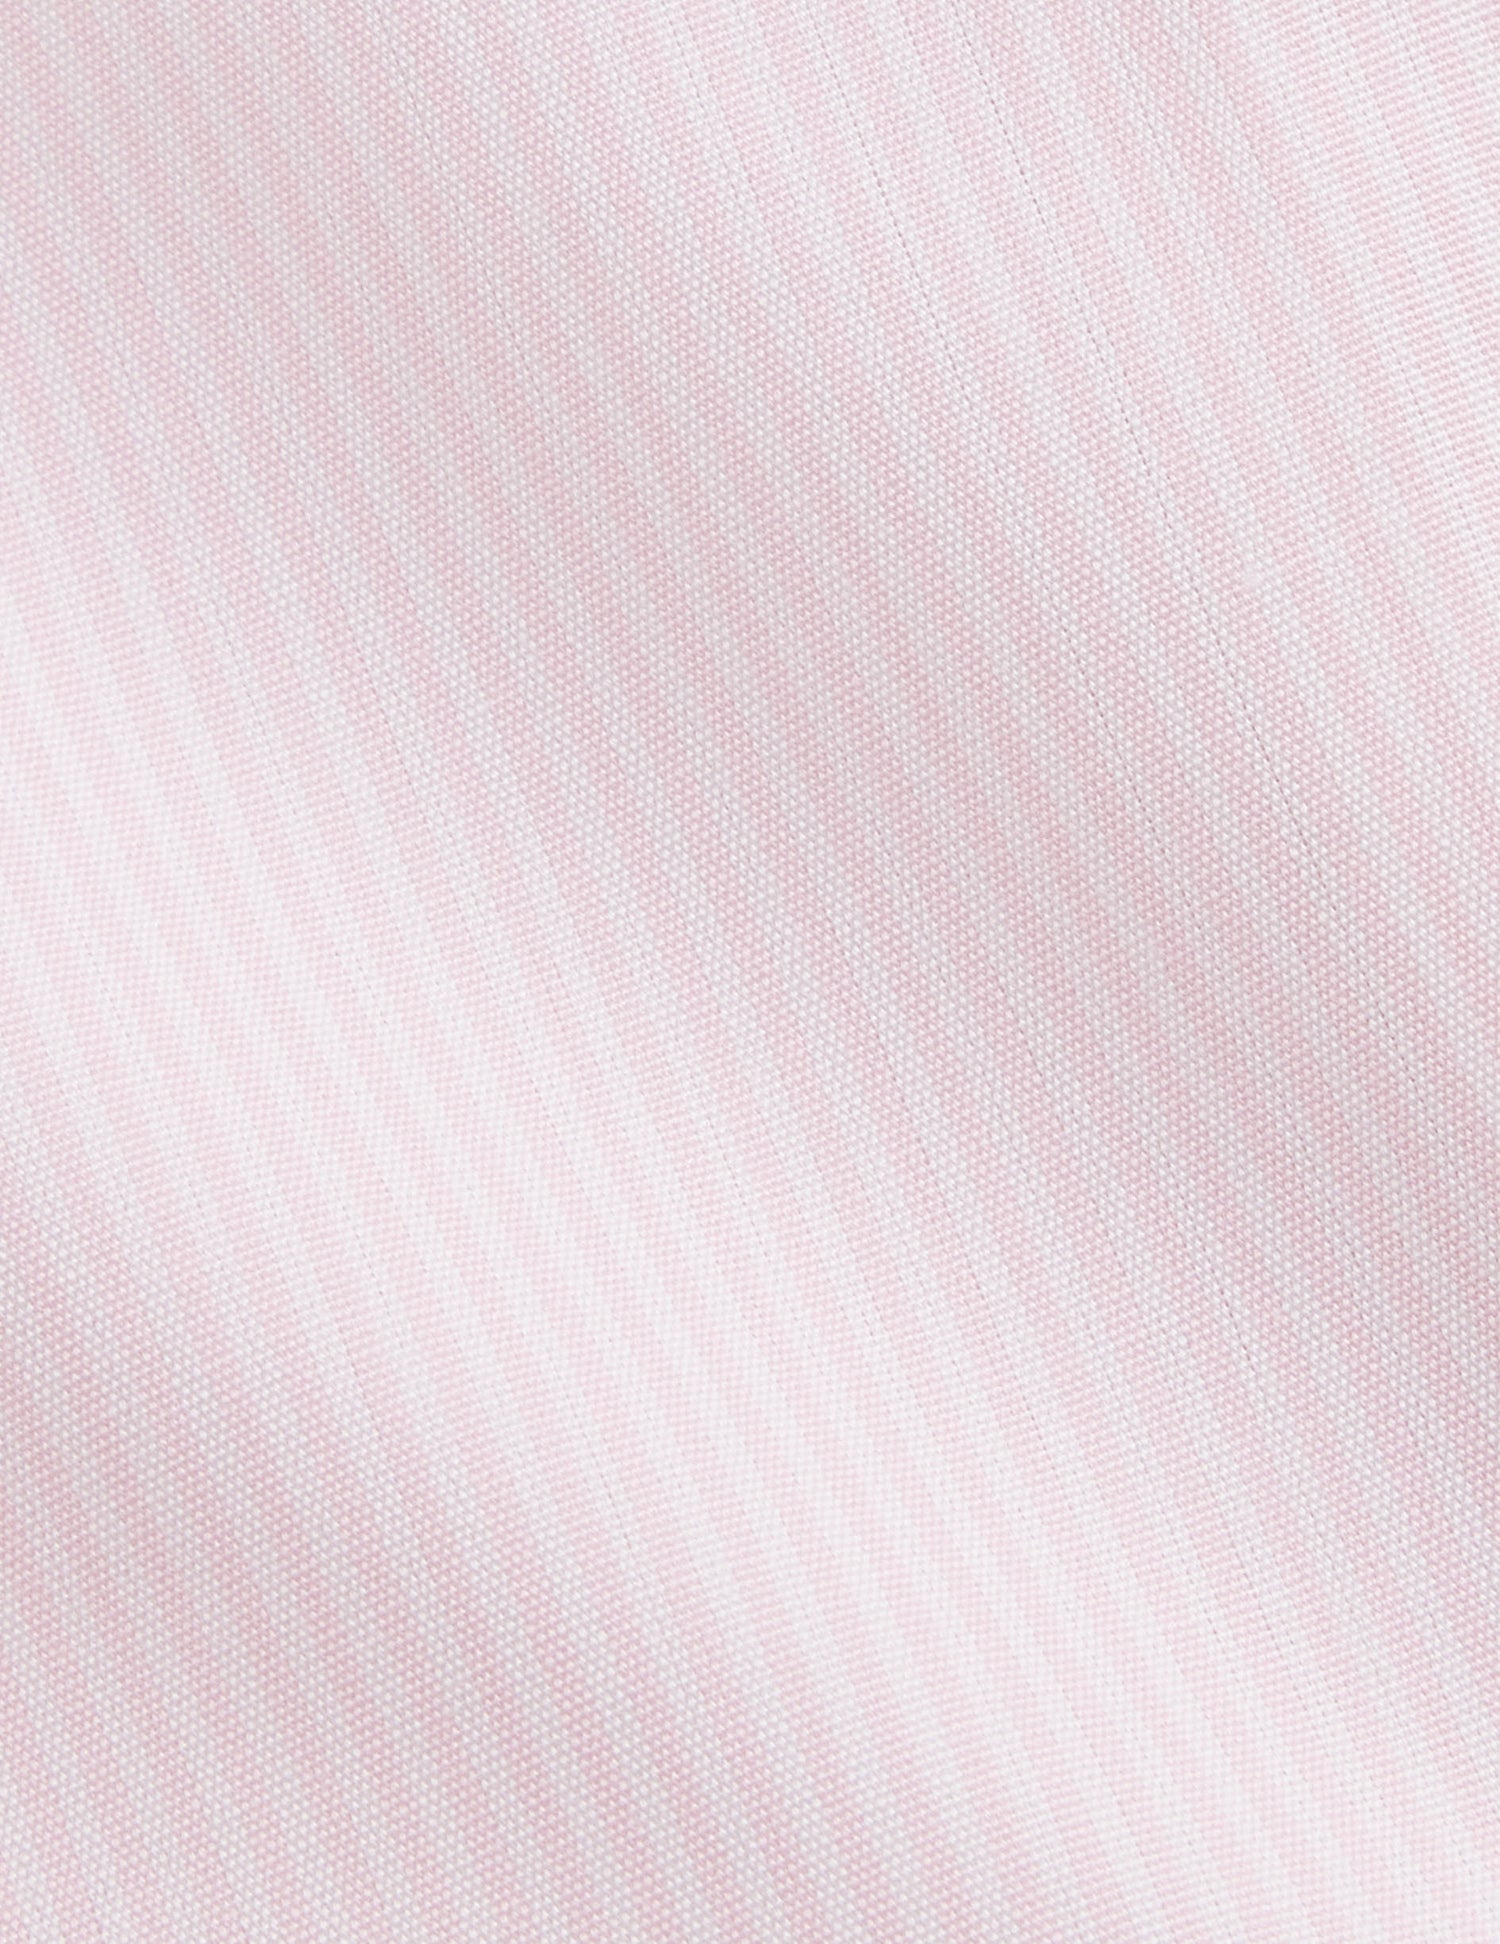 Fitted pink striped shirt - Poplin - Figaret Collar#2